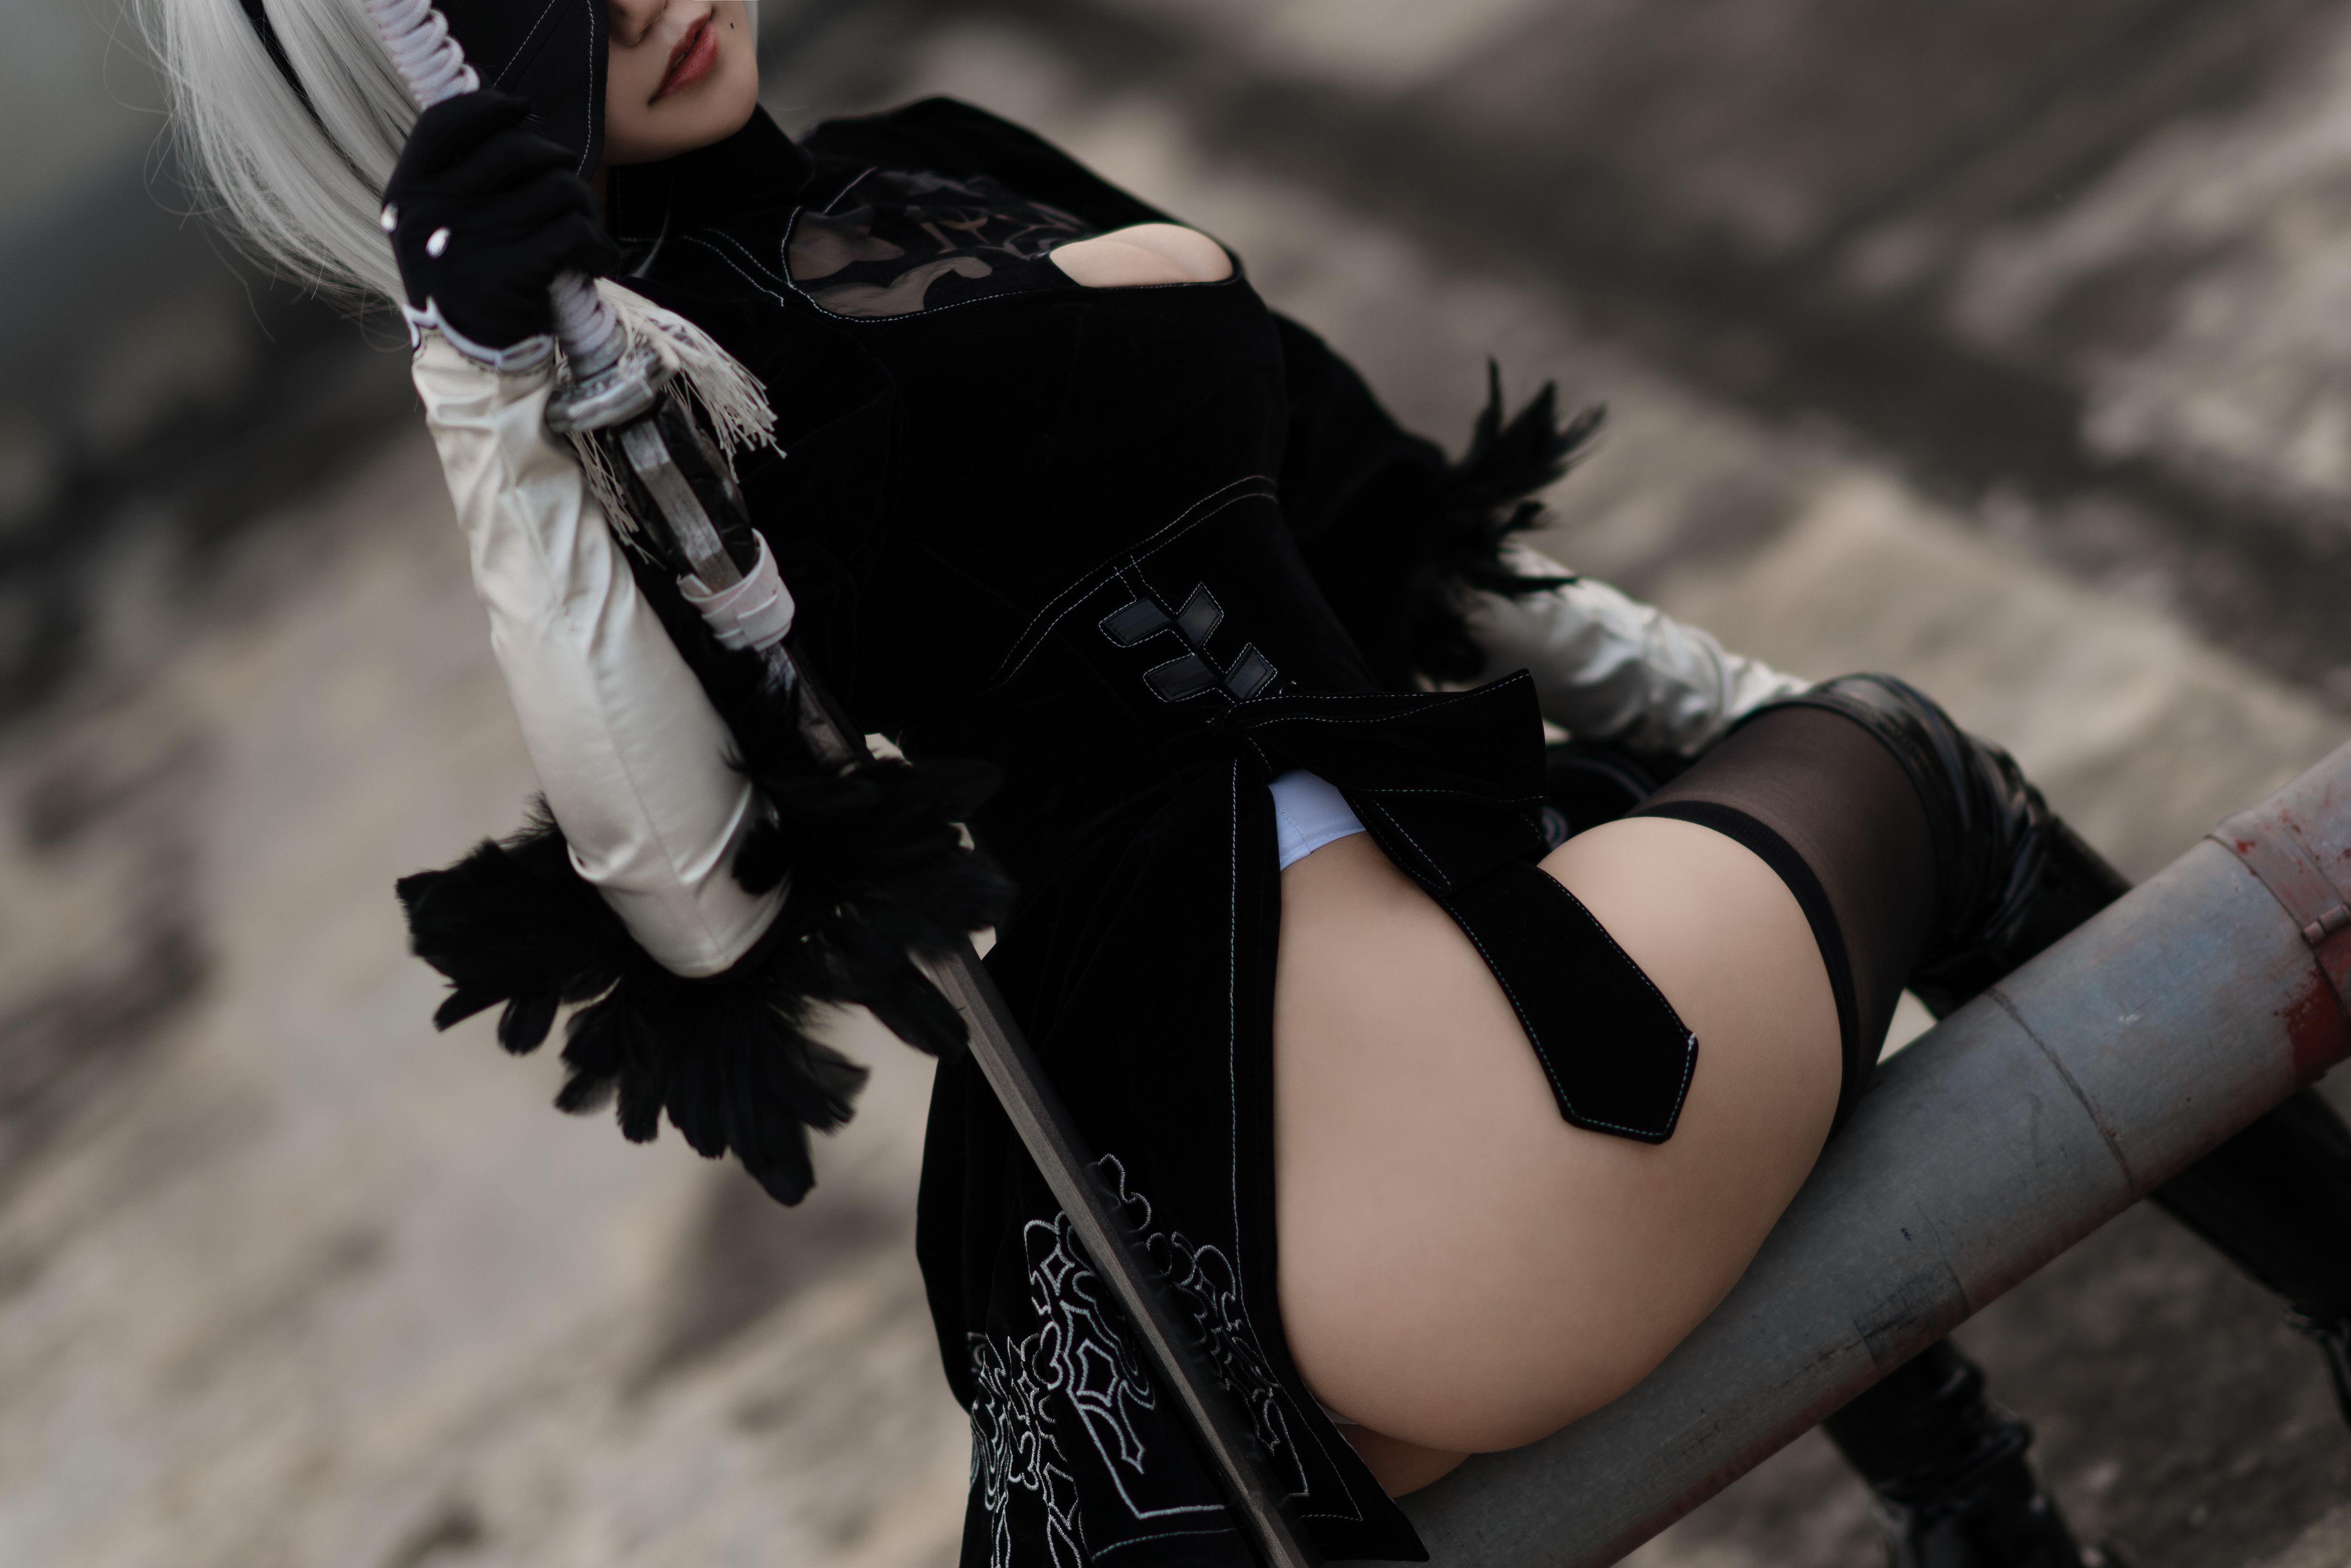 People 4500x3002 Yummy Chiyo women model Asian cosplay 2B (Nier: Automata) Nier: Automata video games video game girls white hair dress black dress ass thighs lingerie stockings black stockings knee-high boots sword outdoors women outdoors eyepatches gloves closeup sitting cleavage